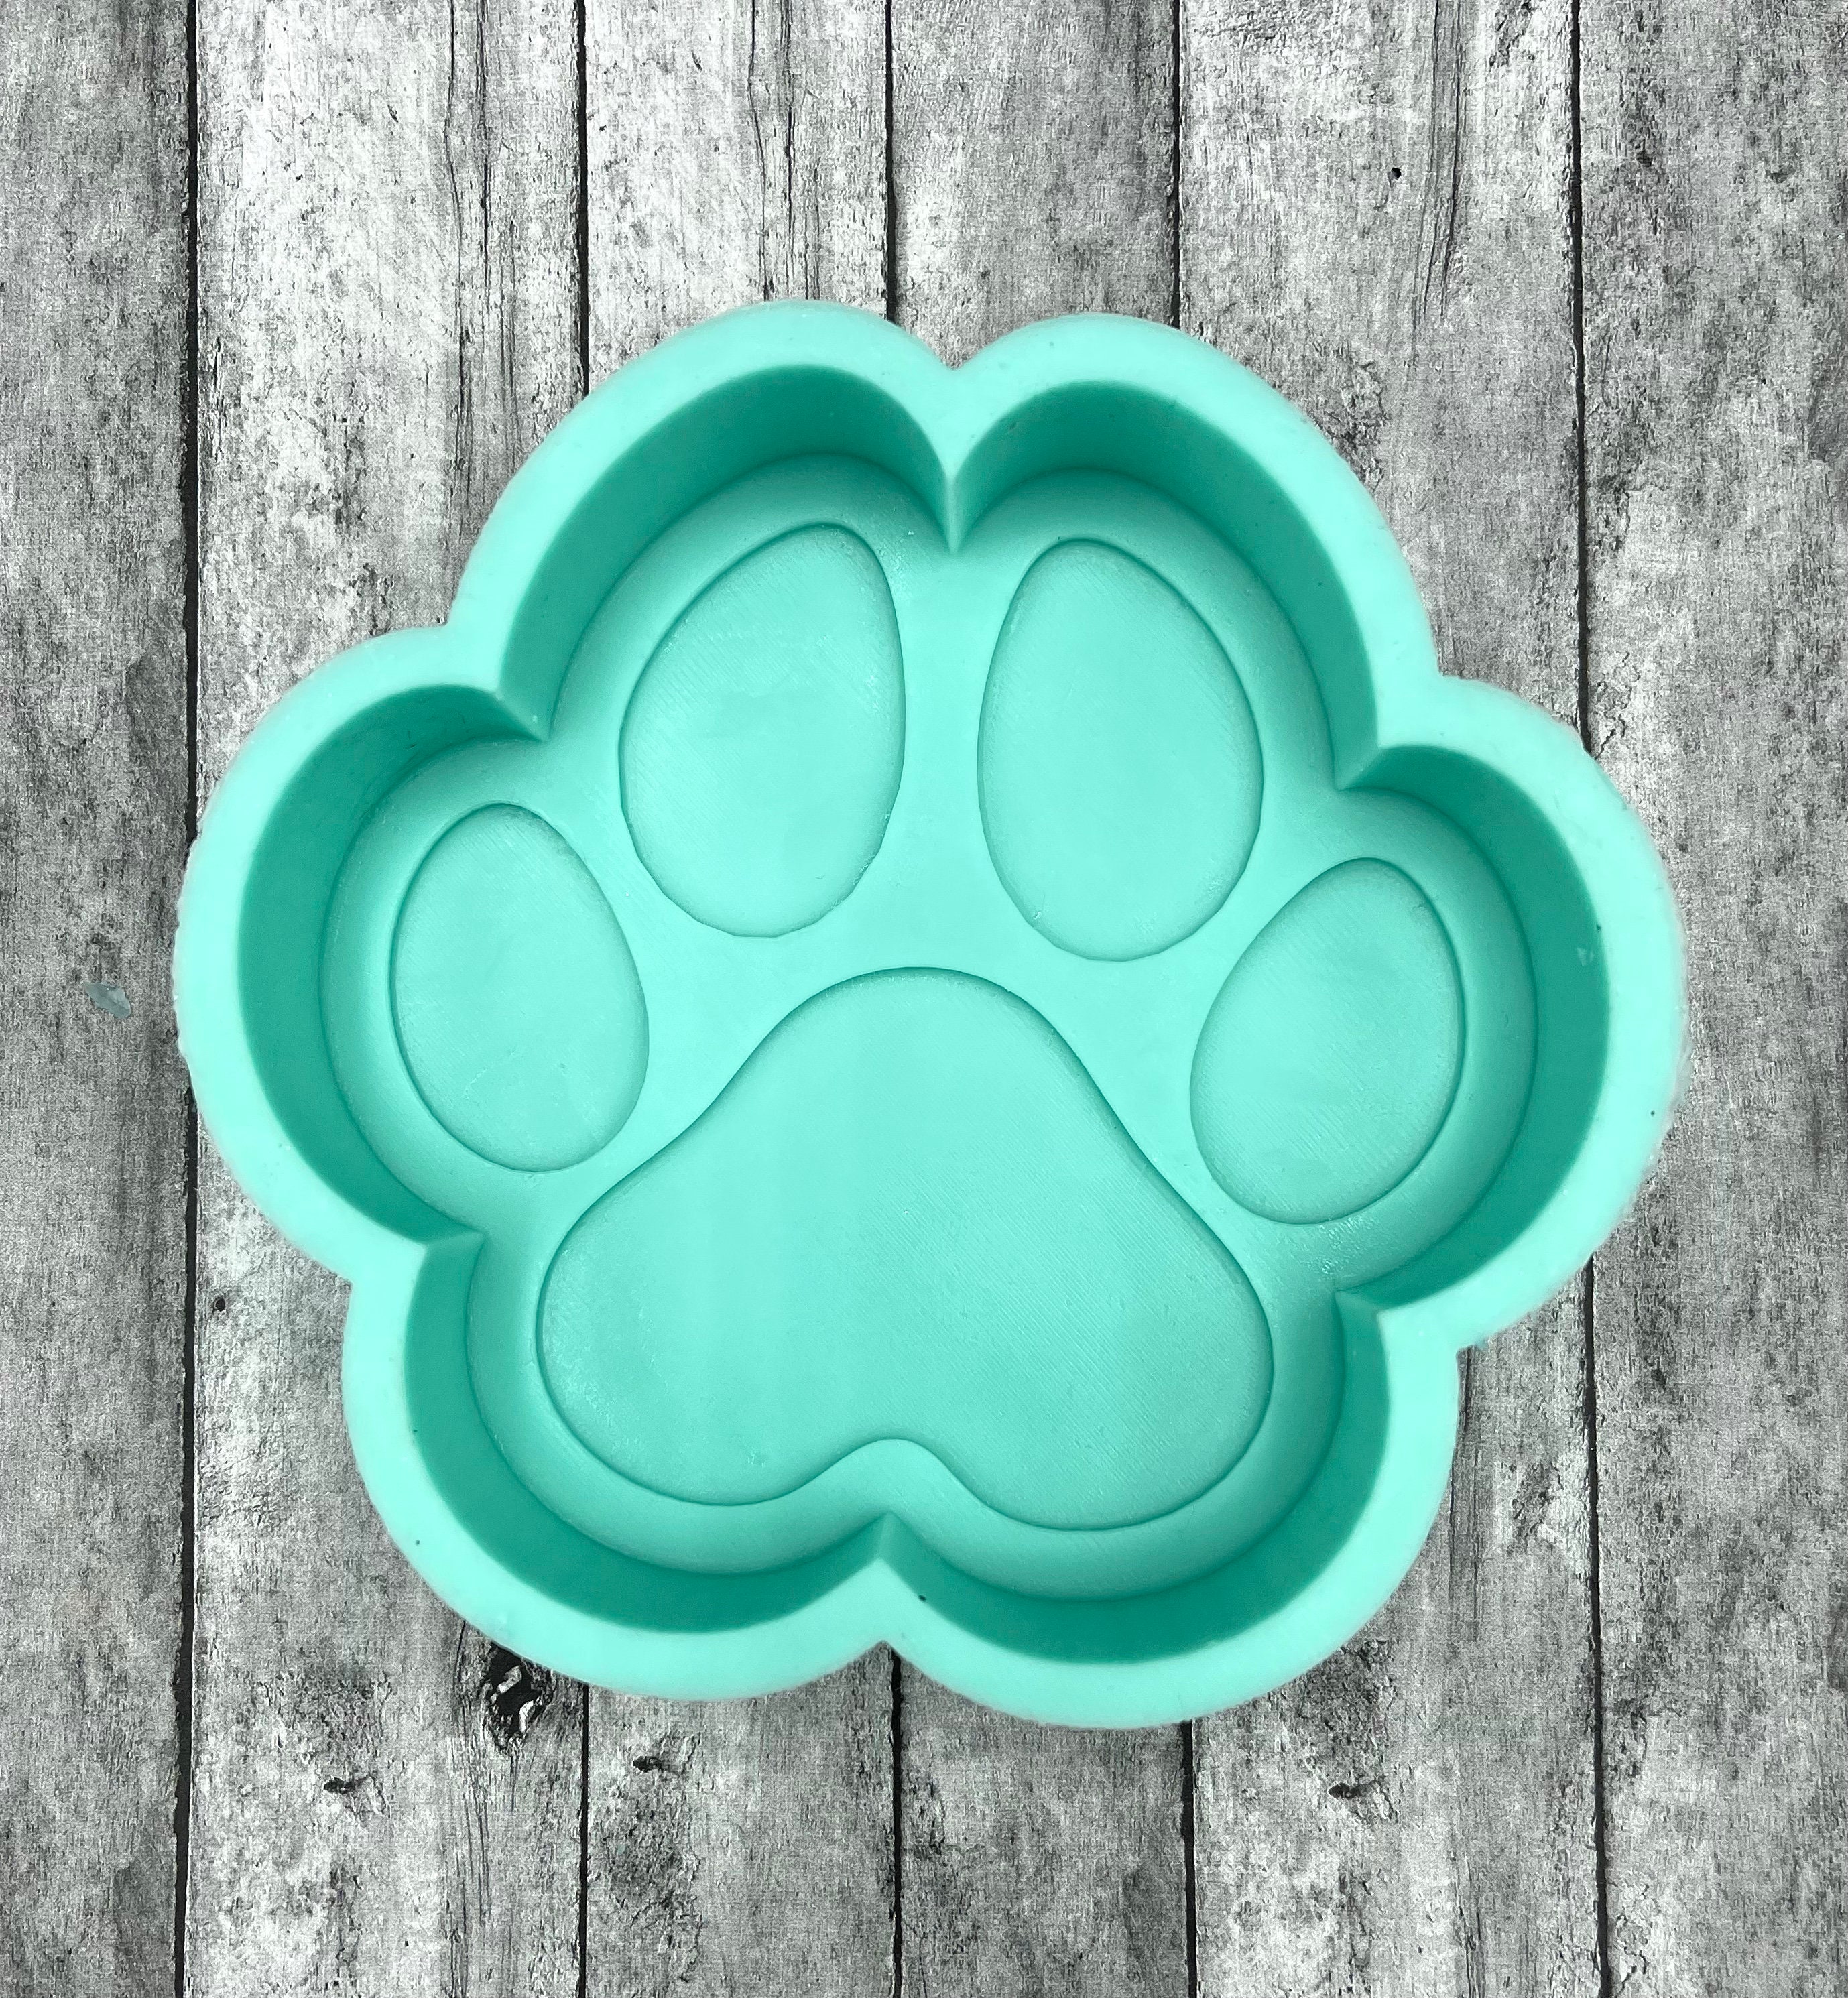 Slopehill 1pc Dog Treat Mold Silicone Dog Paw Silicone Molds Paw Print Mold Candy Mold Dog Treat Chocolate Mold for Homemade Dog Treats,Soap,Candy., Adult